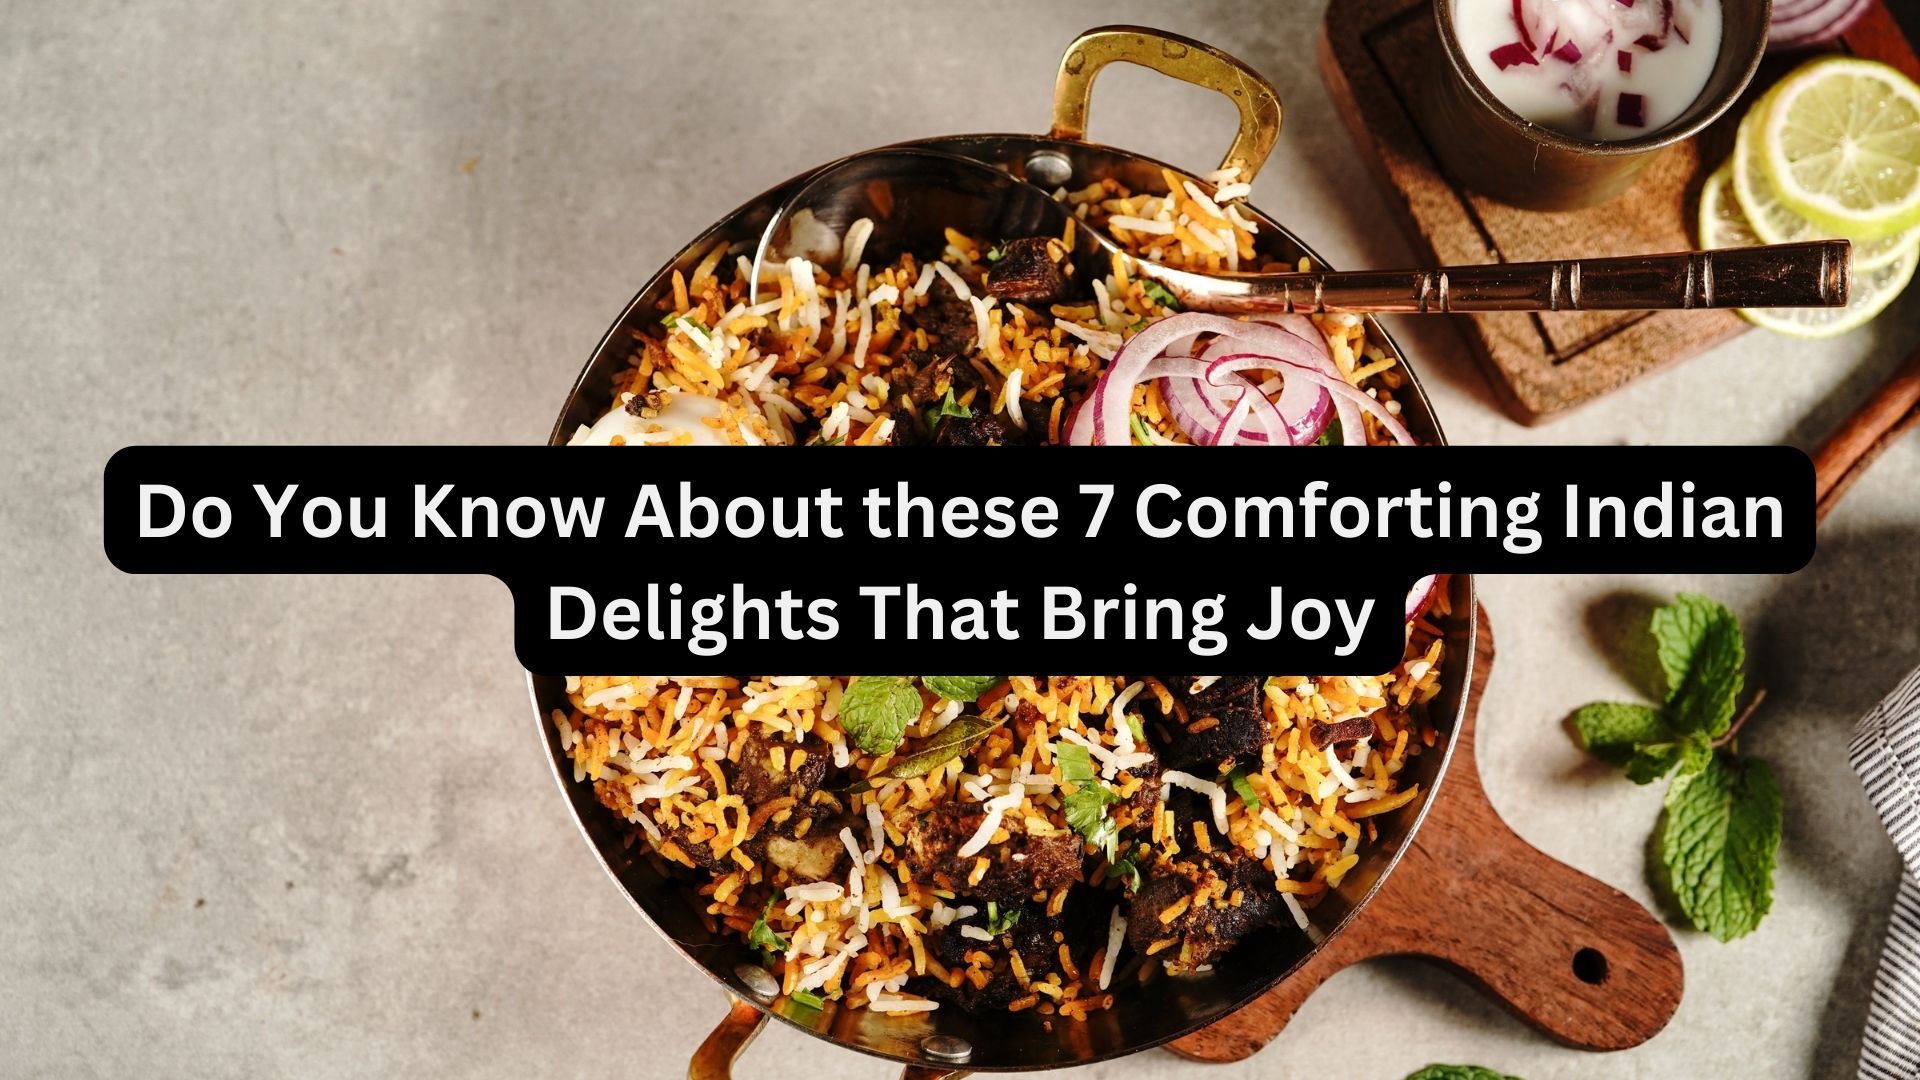 Do You Know About these 7 Comforting Indian Delights That Bring Joy